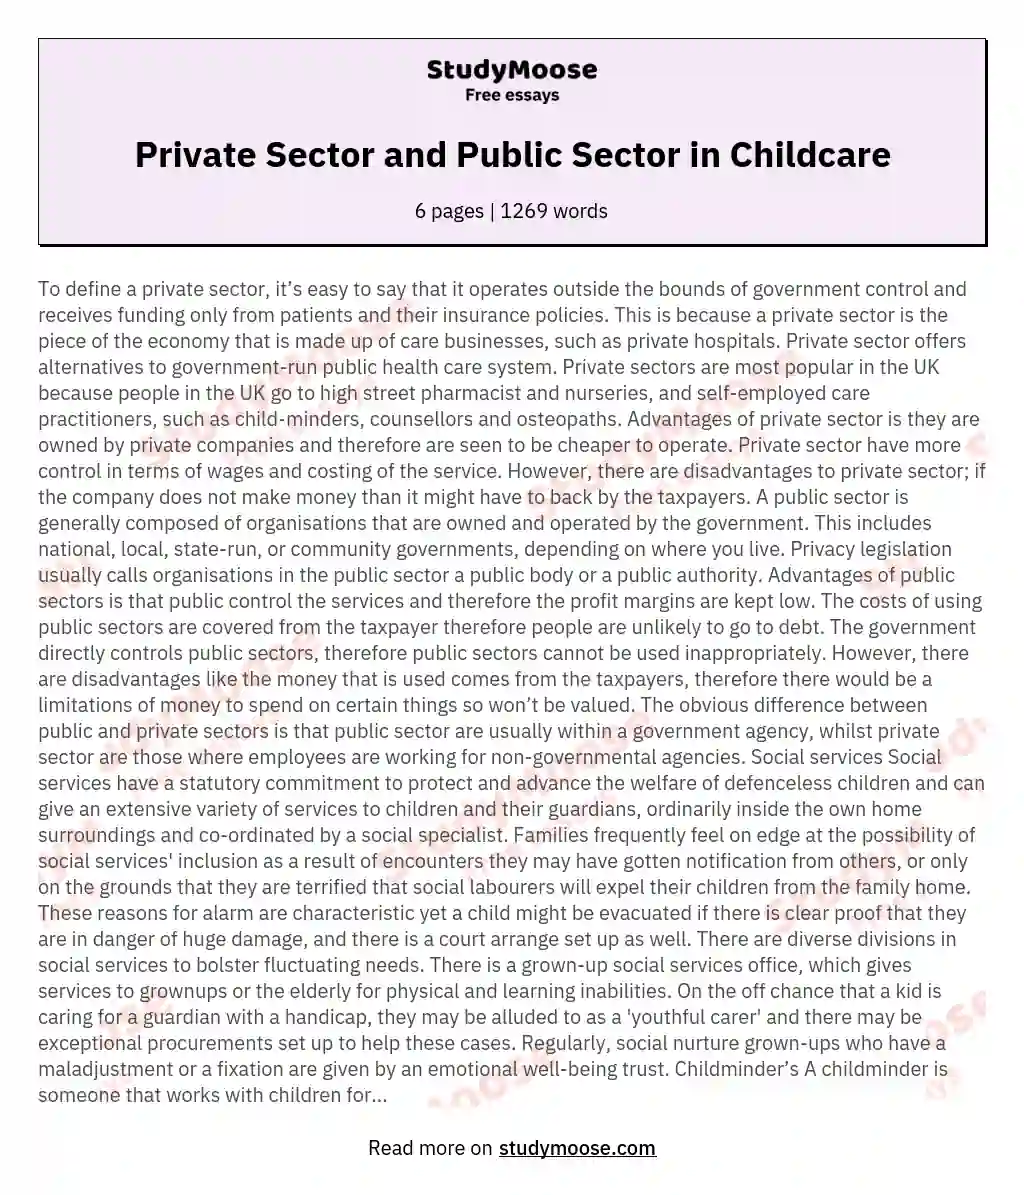 Private Sector and Public Sector in Childcare essay